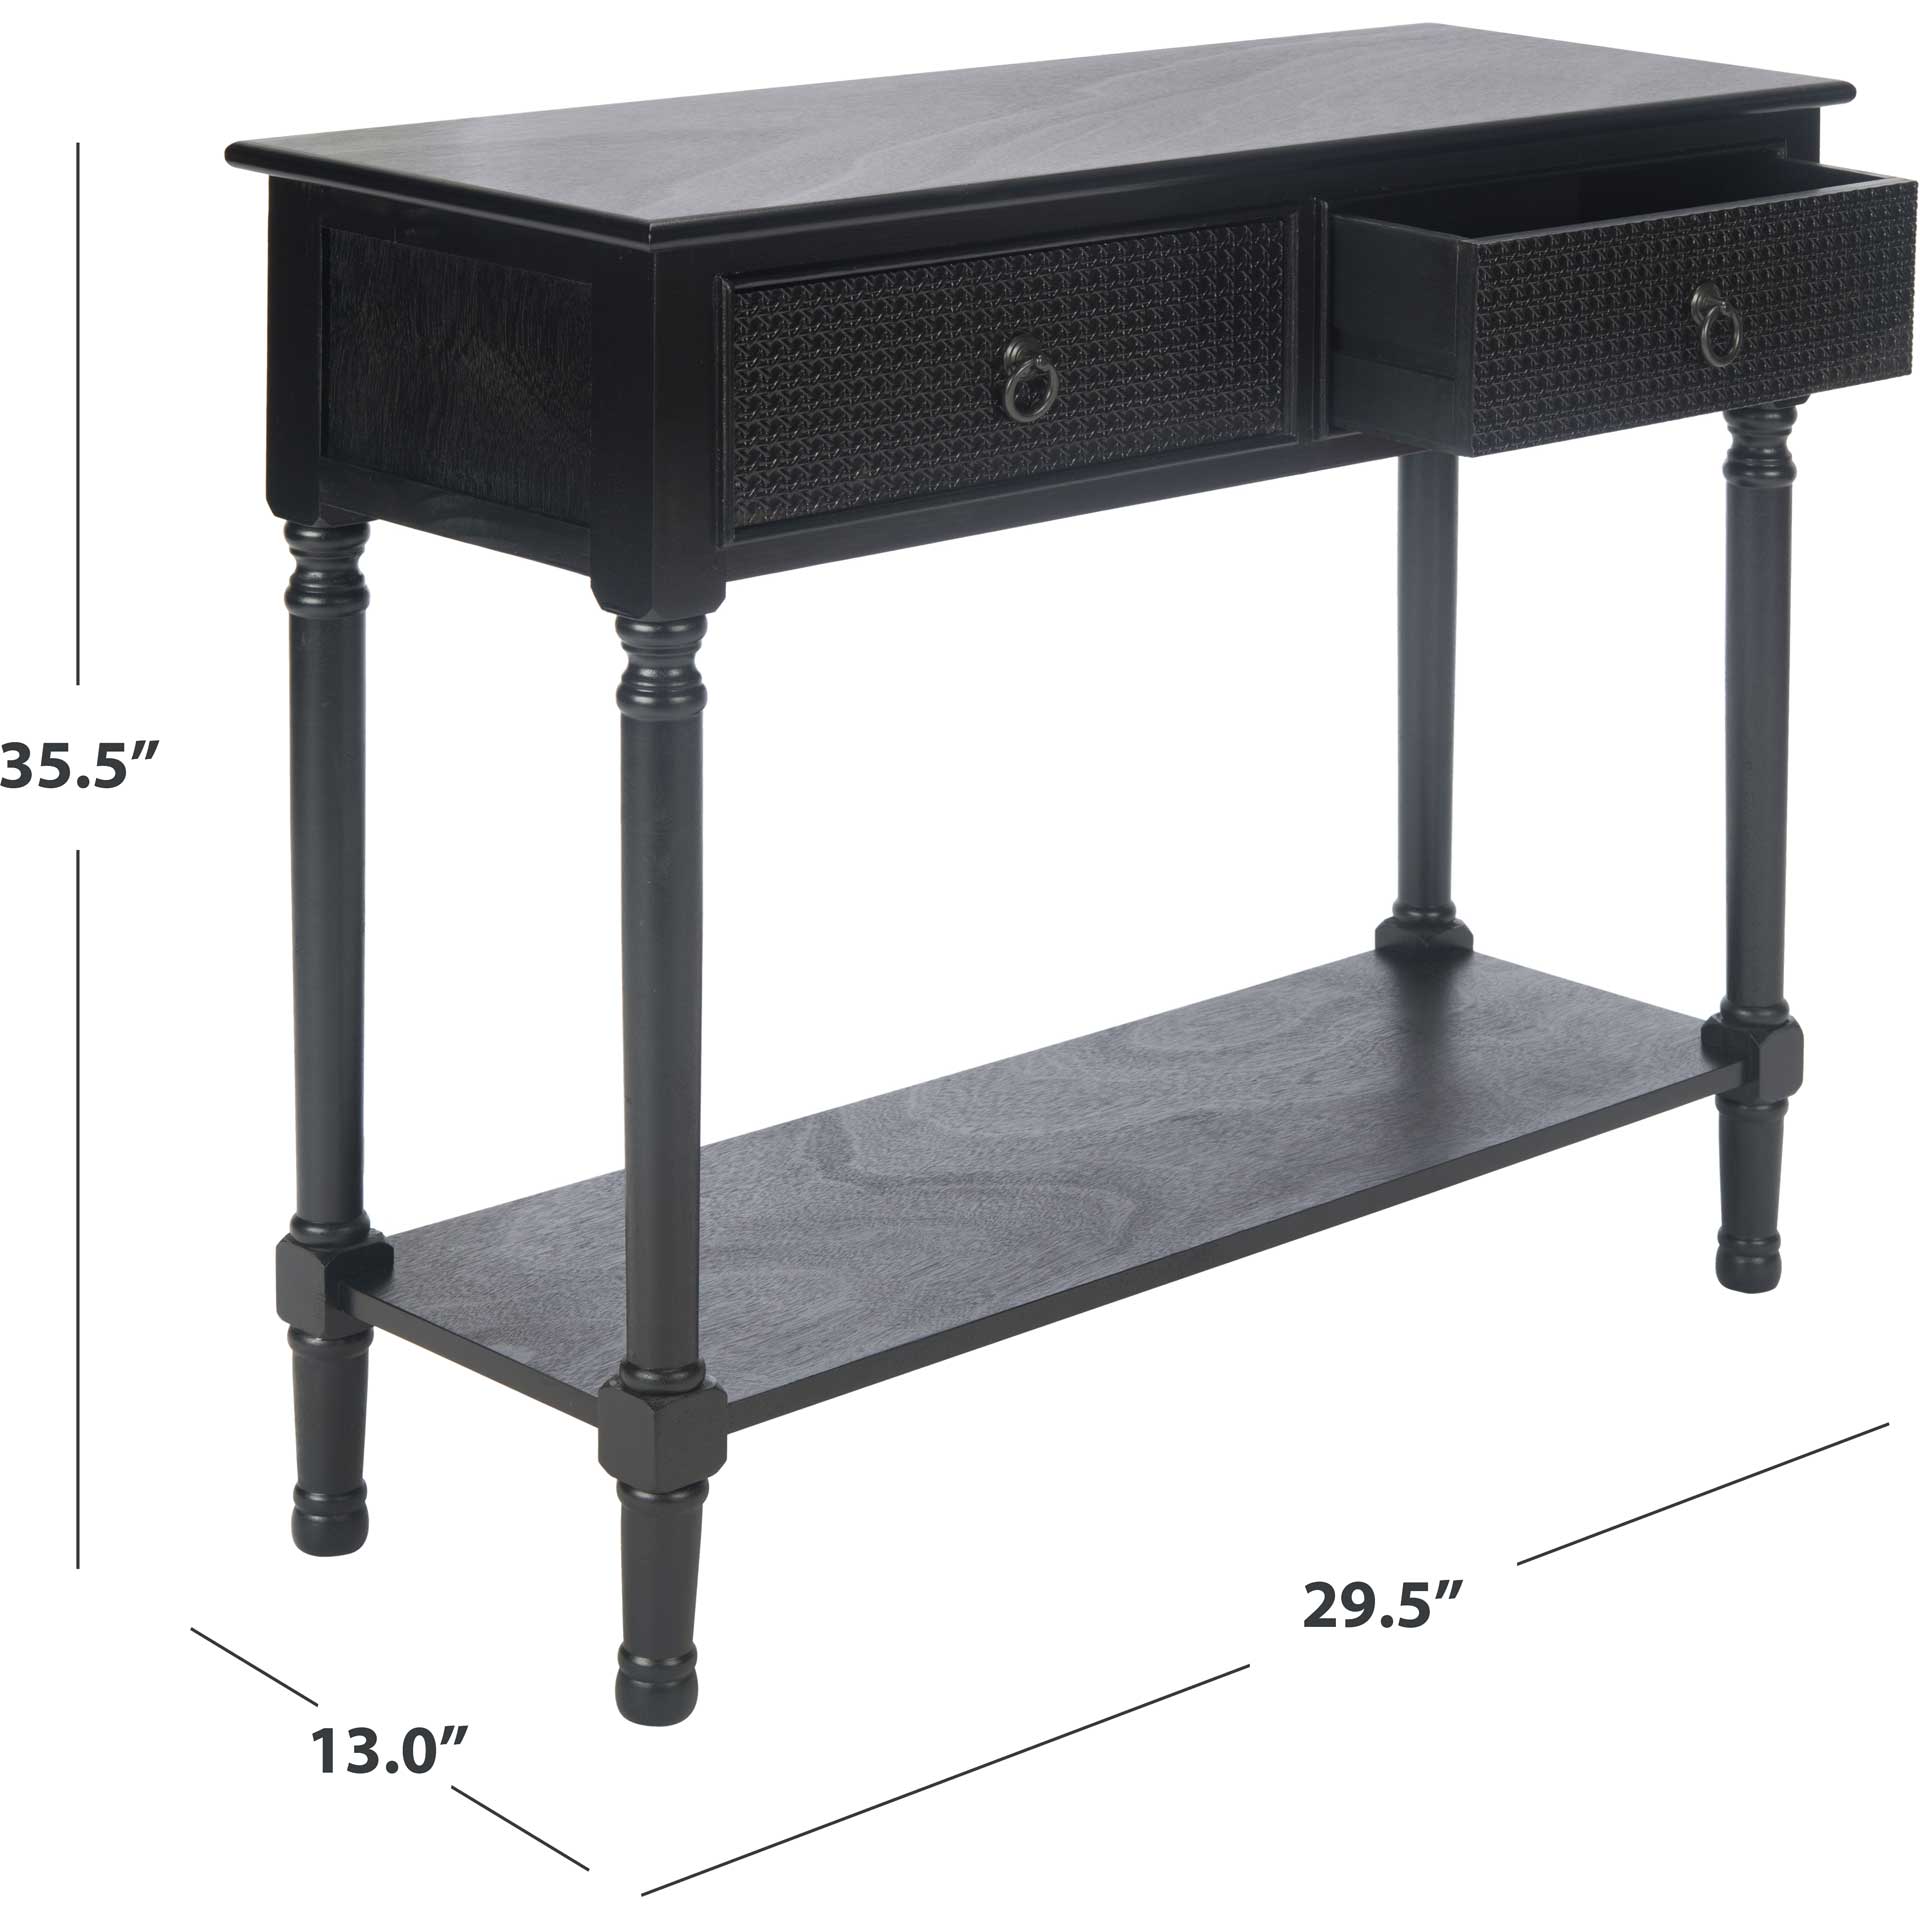 Hale 2 Drawer Console Table Black